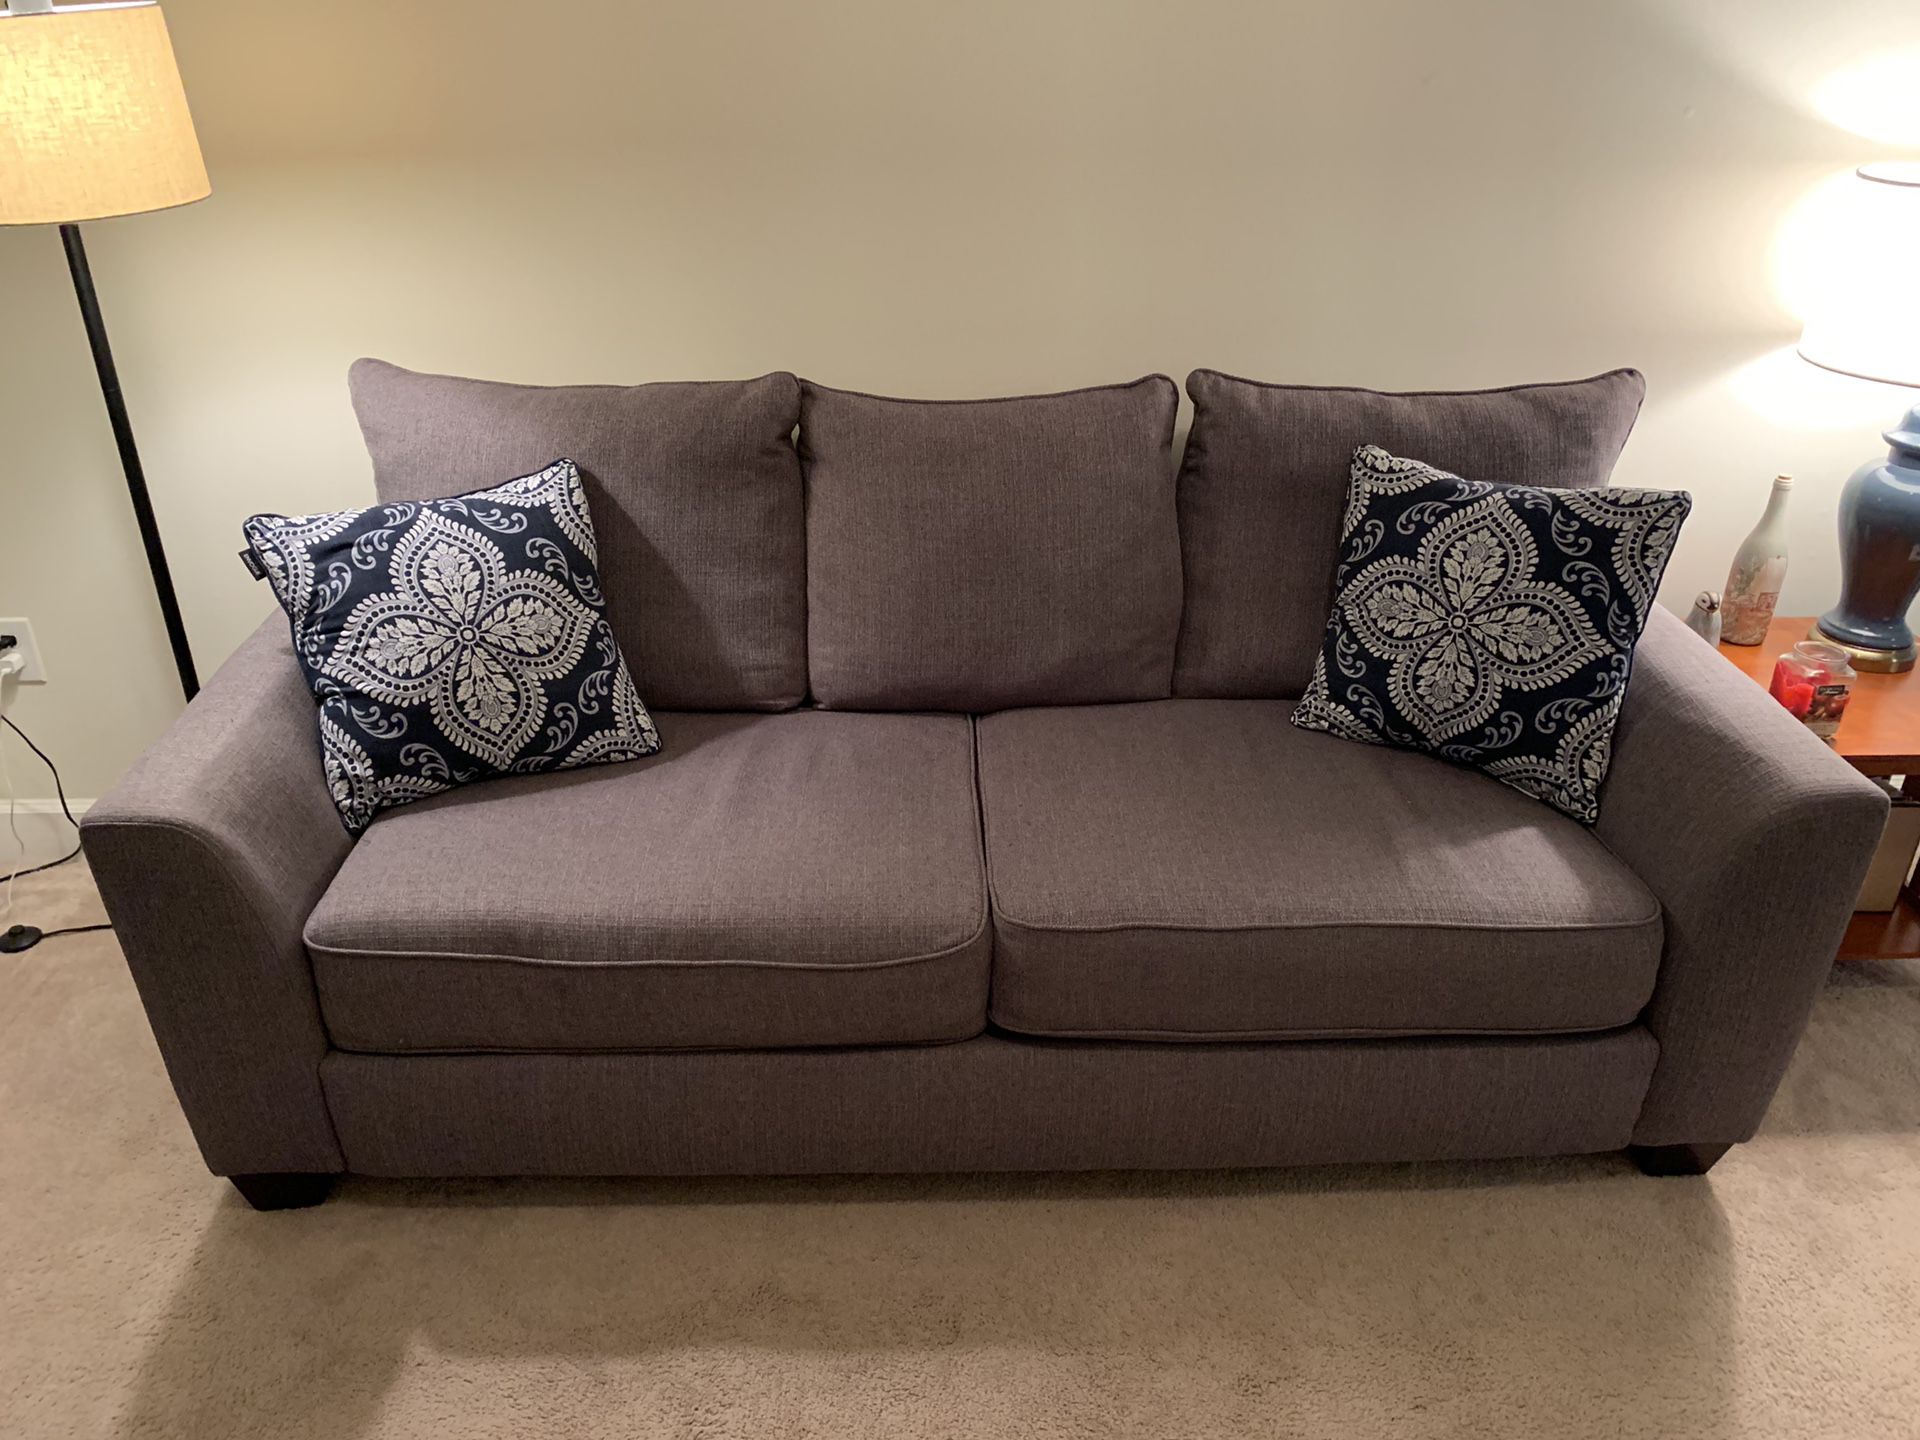 Heather Gray Upholstered Couch